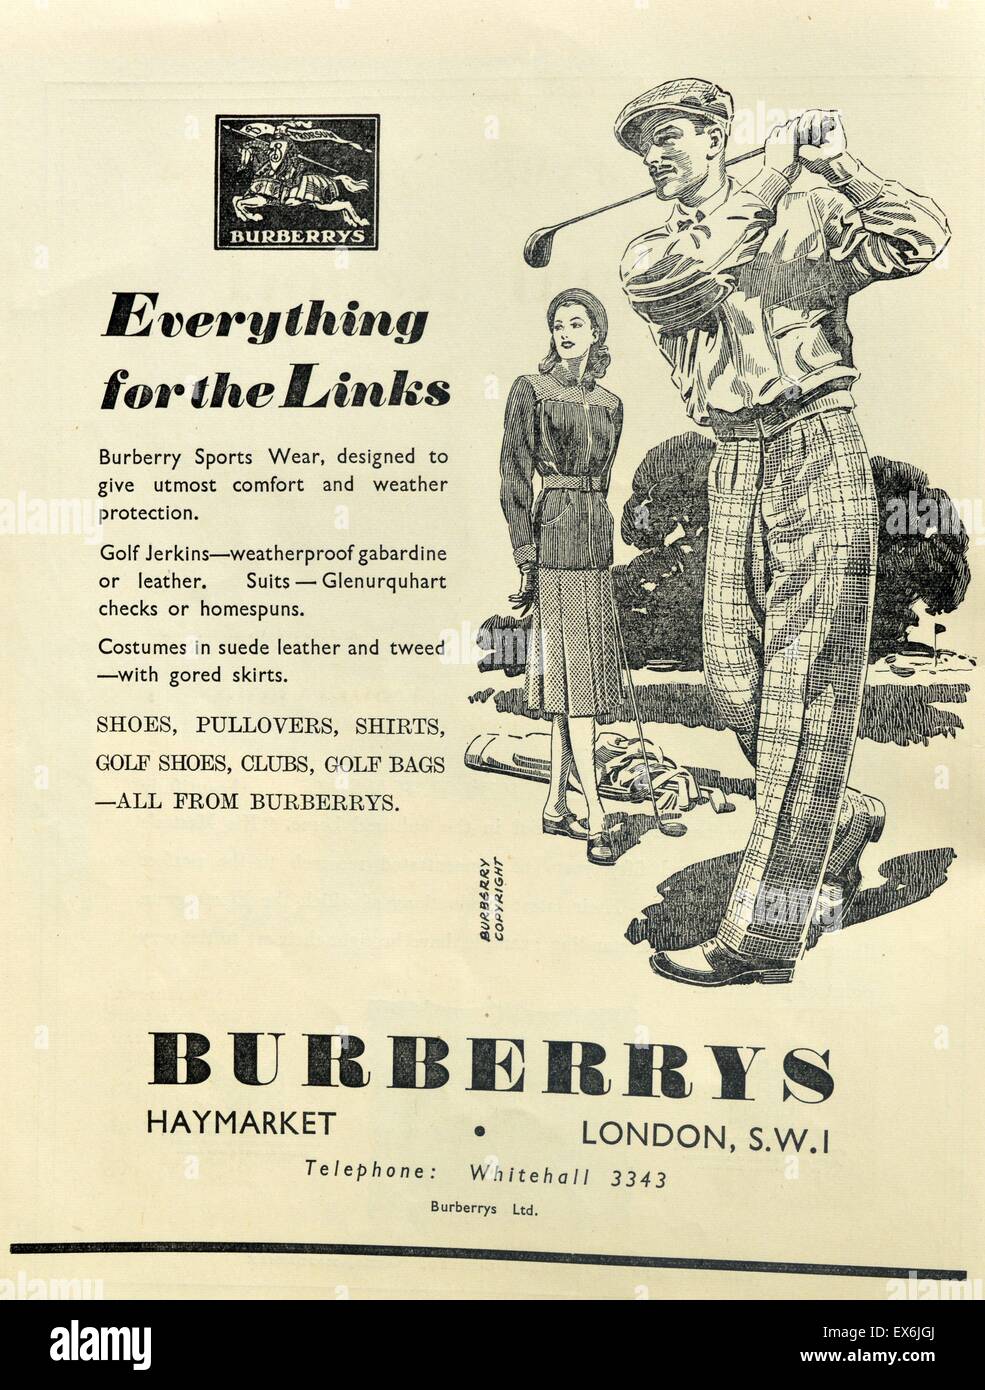 Advert for Burberry sport clothes showing a man and woman at golf 1948 Stock Photo